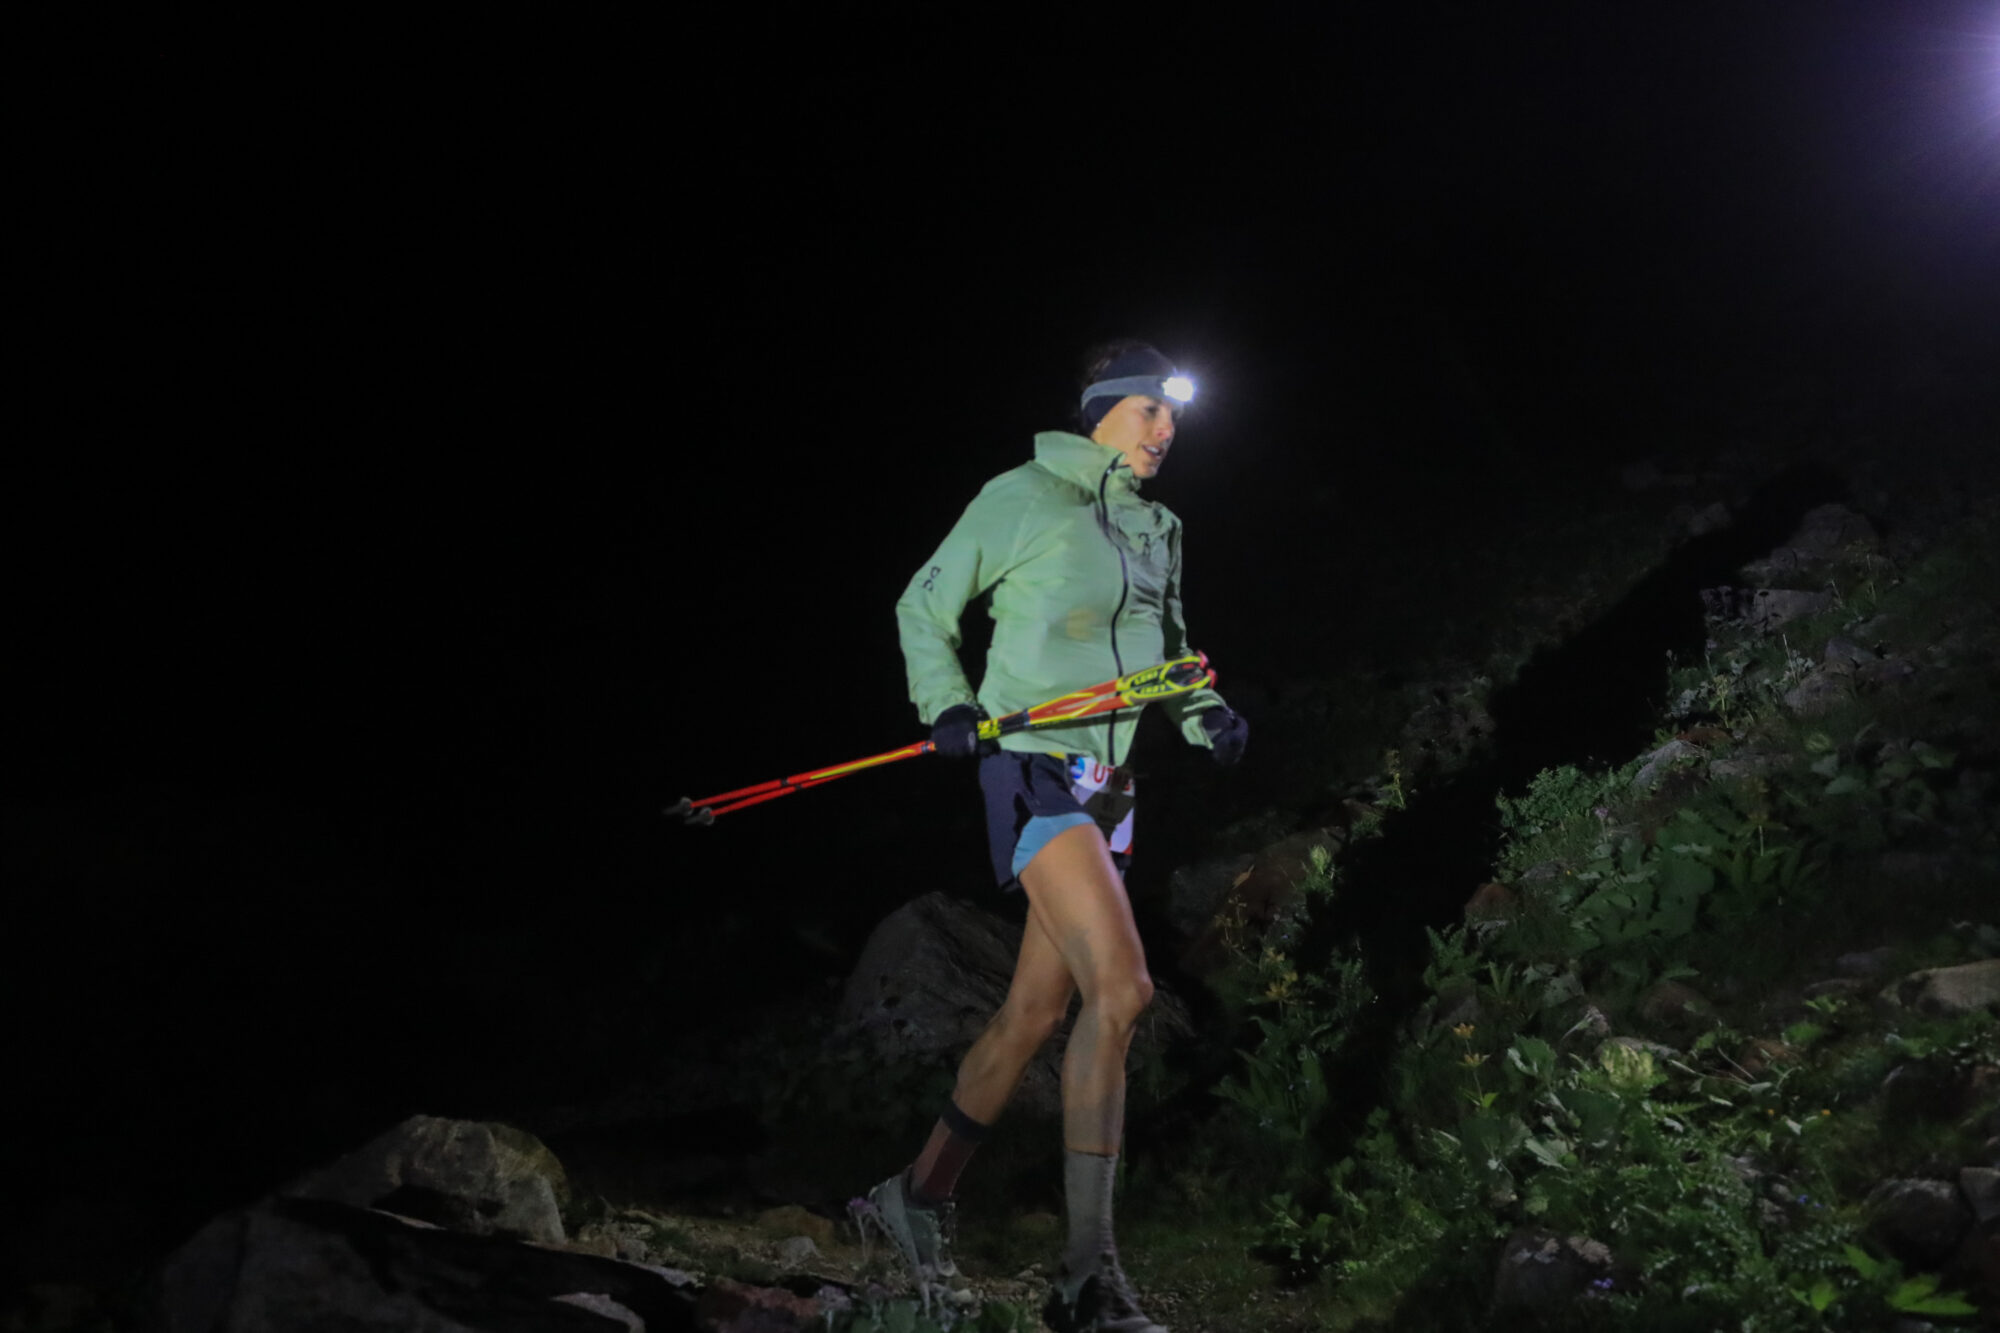 2022 - Story Dacia - the UTMB Mont-Blanc race is the ultimate test